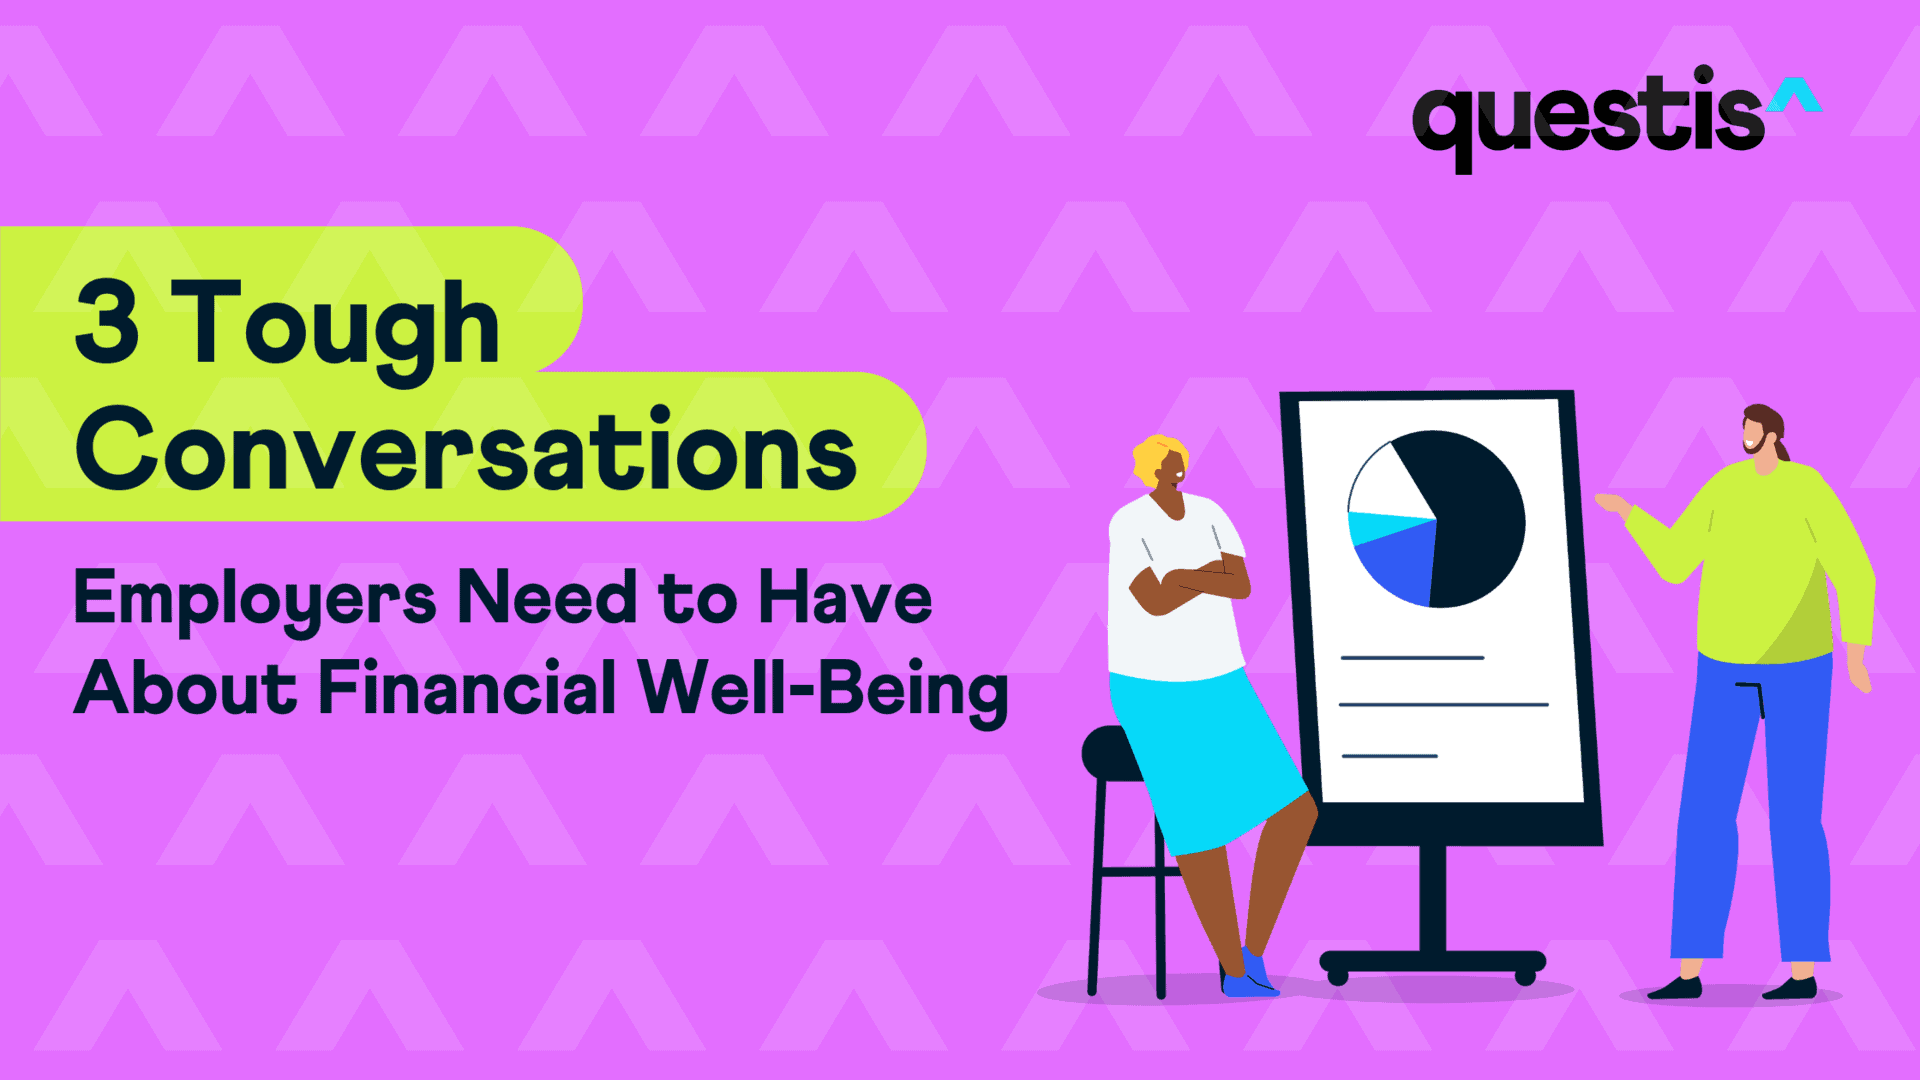 3 Tough Conversations Employers Need to Have About Financial Well-Being 